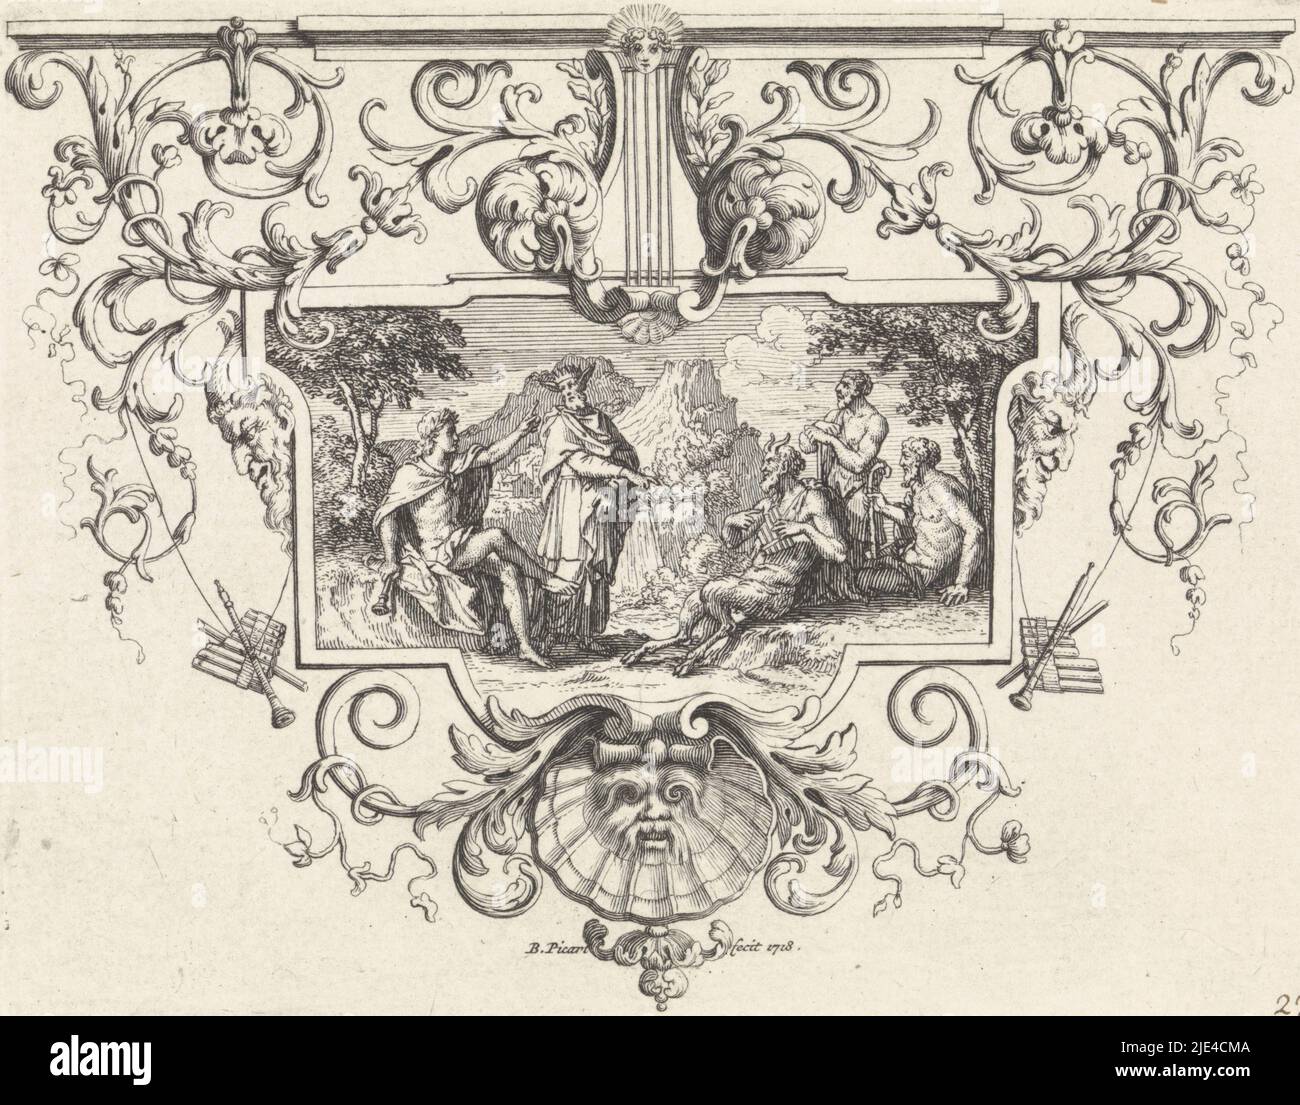 Judgment of Midas, Bernard Picart, 1718, King Midas designates Pan as the winner in the musical contest between Pan and Apollo. The Apollo seated on the left gives Midas donkey ears for punishment. The scene is framed in an ornamental frame., print maker: Bernard Picart, (mentioned on object), Amsterdam, 1718, paper, etching, engraving, h 102 mm × w 131 mm Stock Photo